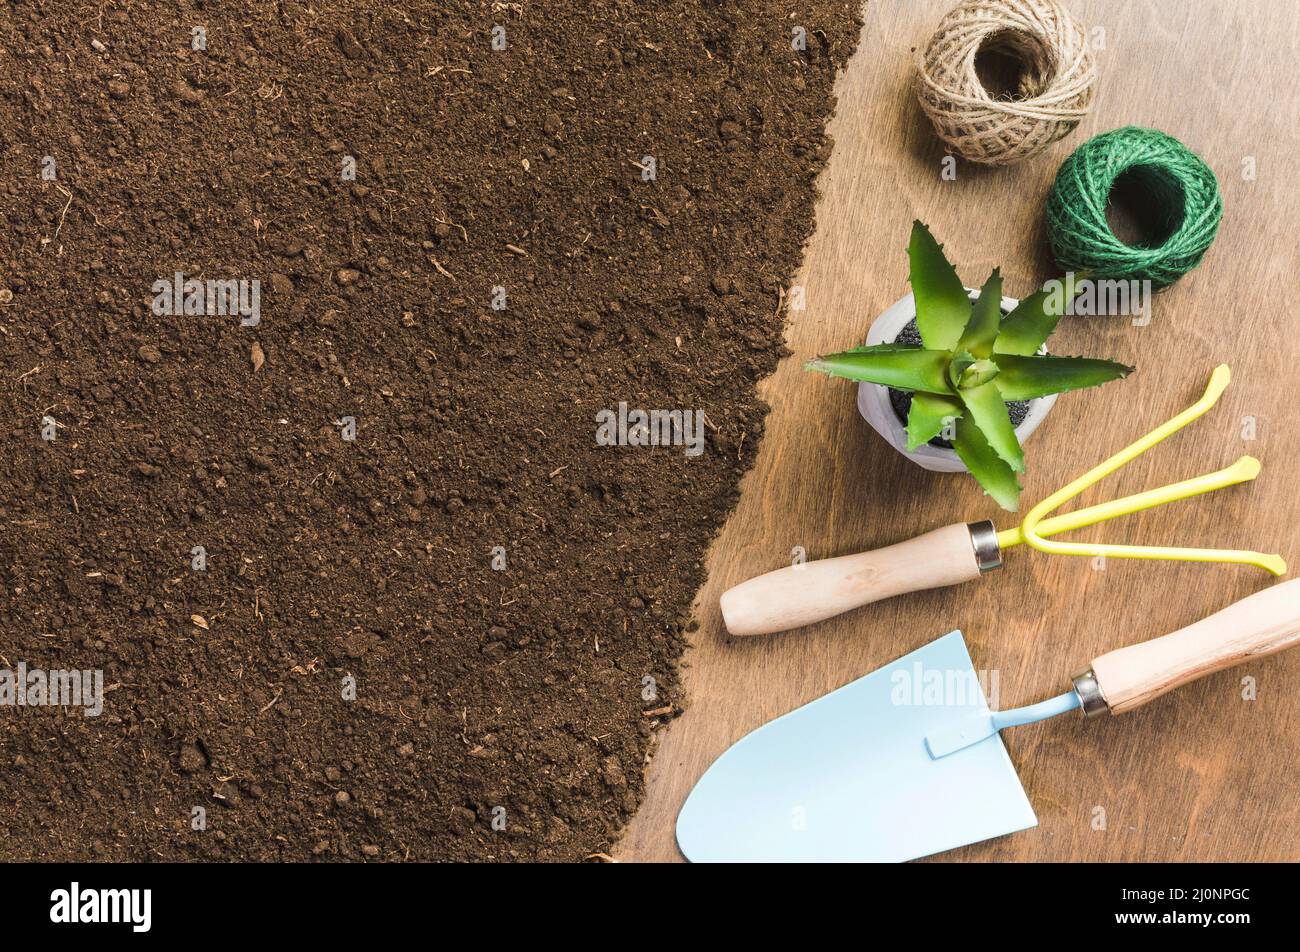 Top view gardening tools ground. High quality and resolution beautiful photo concept Stock Photo